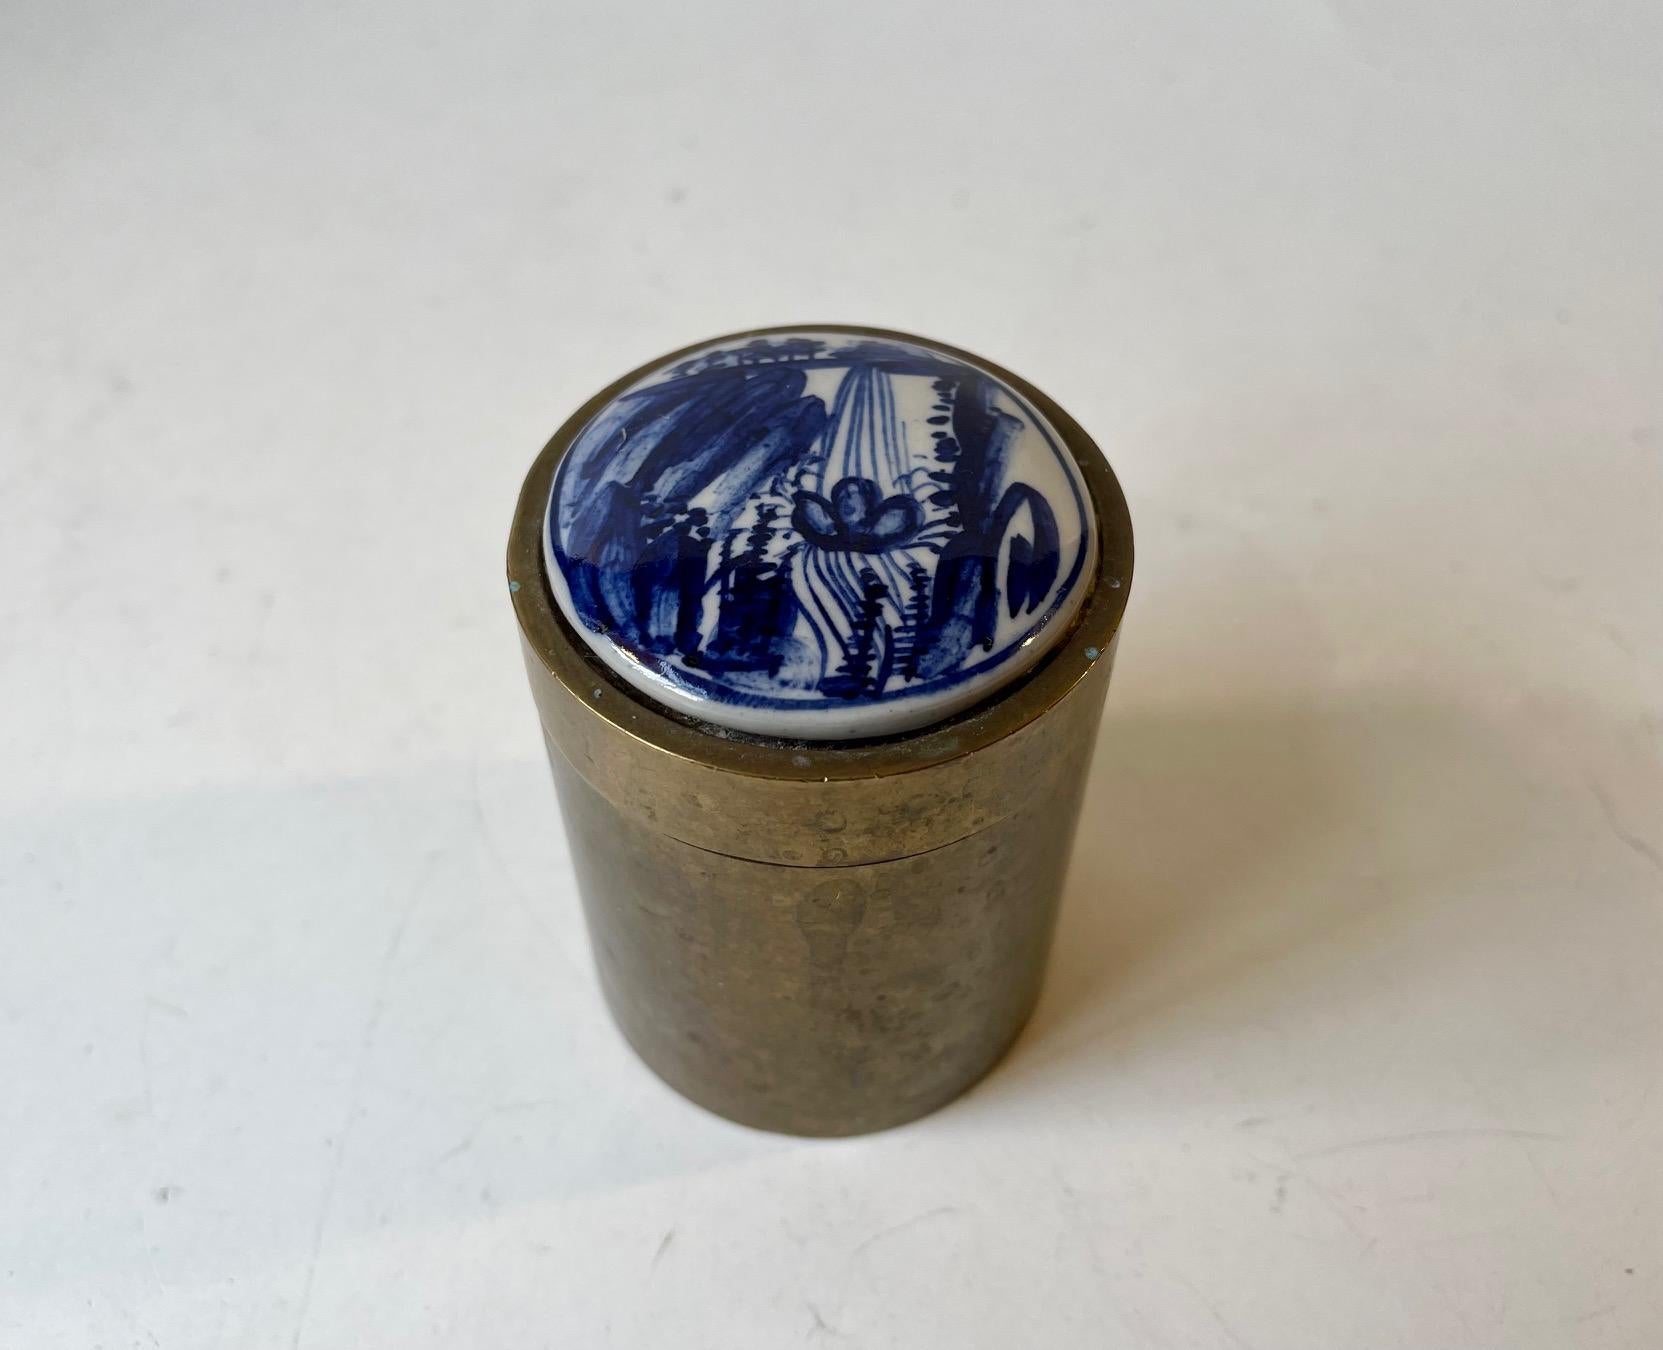 Small container for cigarettes or tobacco. Its made from Solid patinated brass and its screw-of lid is decorated with a small hand-painted porcelain platter from Delft. Measurements: H: 8 cm, D: 6 cm.